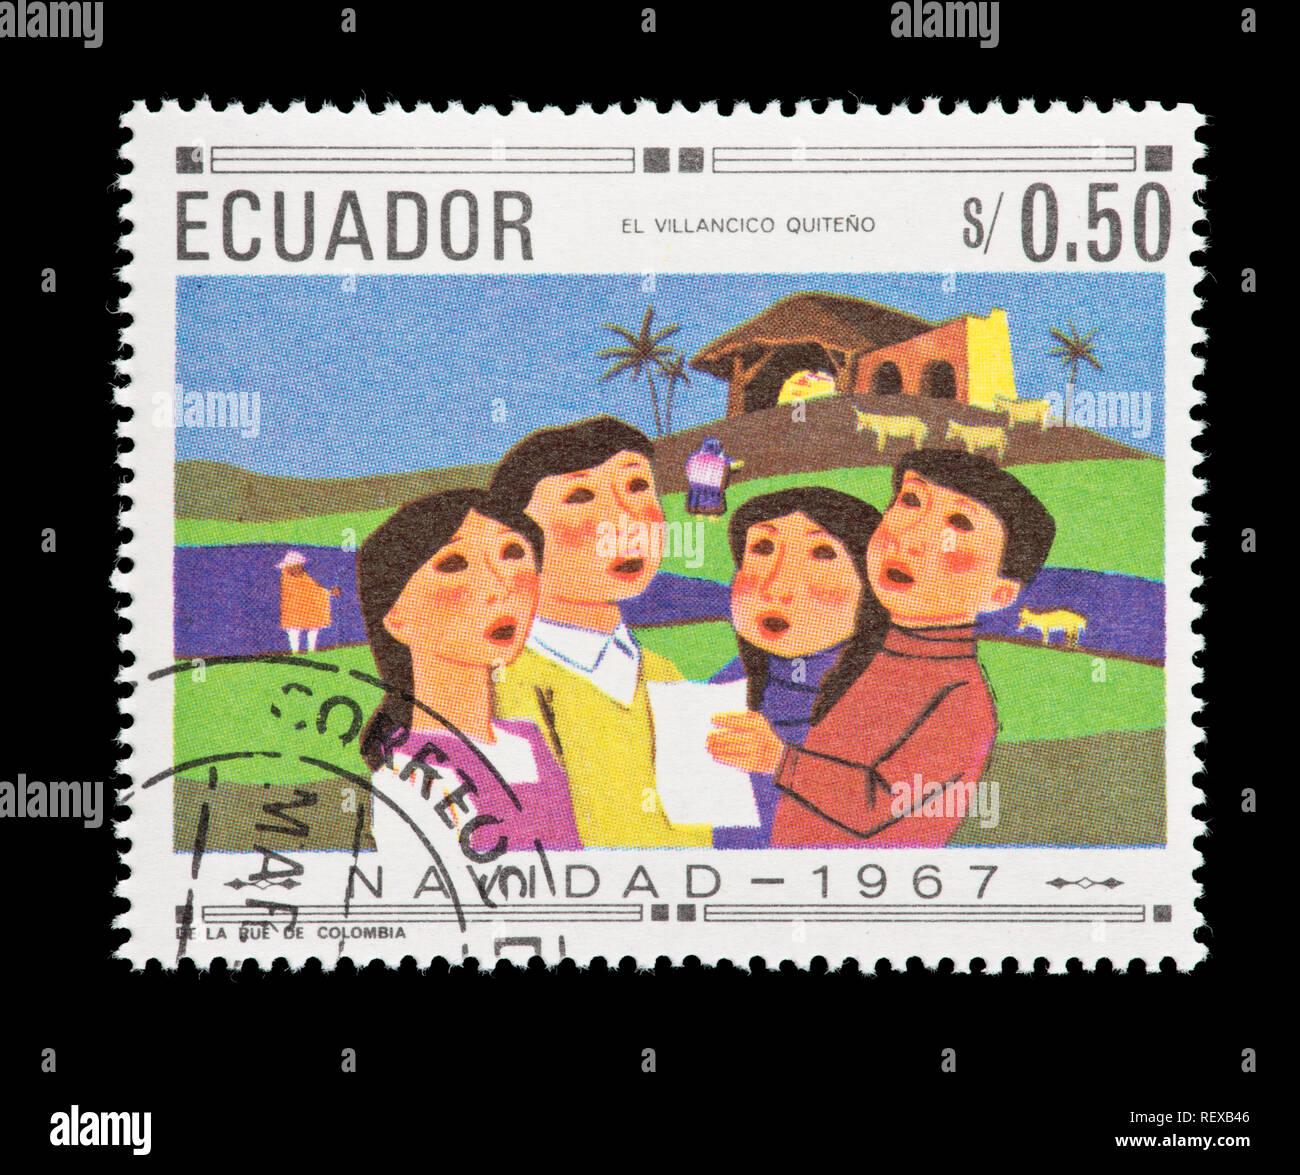 Postage stamp from Ecuador depicting children singing Christmas songs. Stock Photo